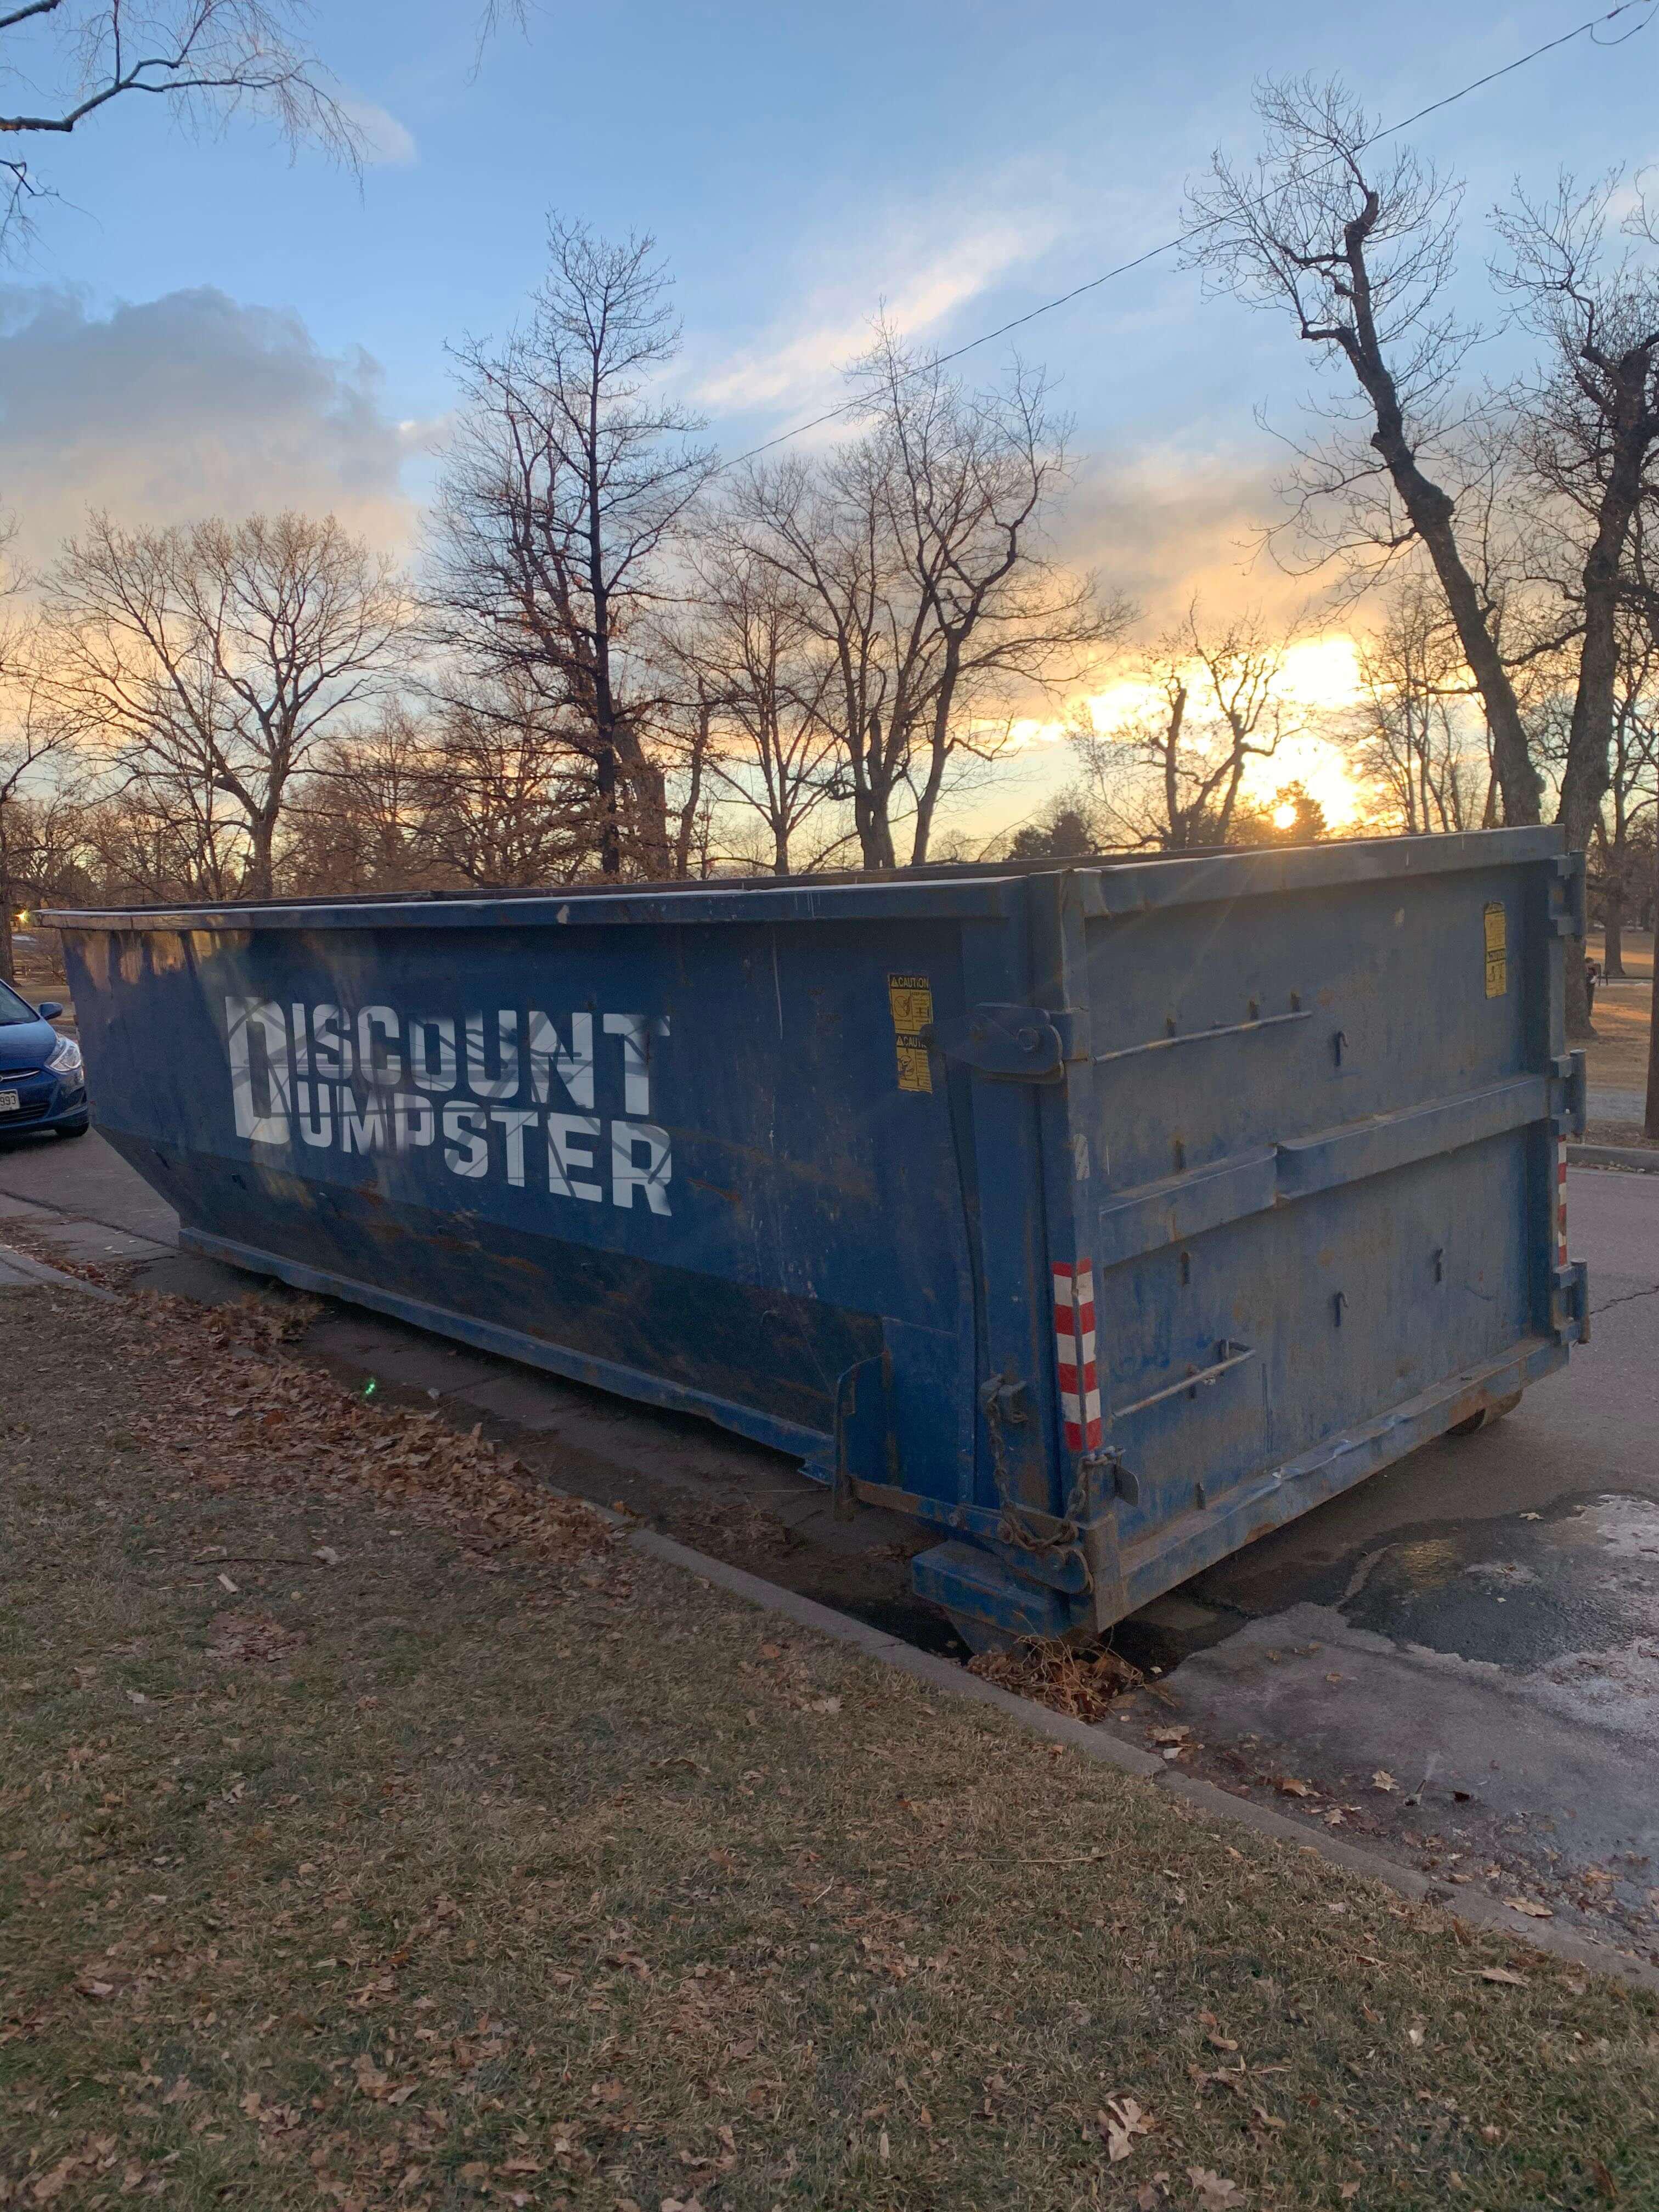 Discount dumpster is here to provide roll off dumpsters rentals and waste removal for your next cons Discount Dumpster Chicago (312)549-9198